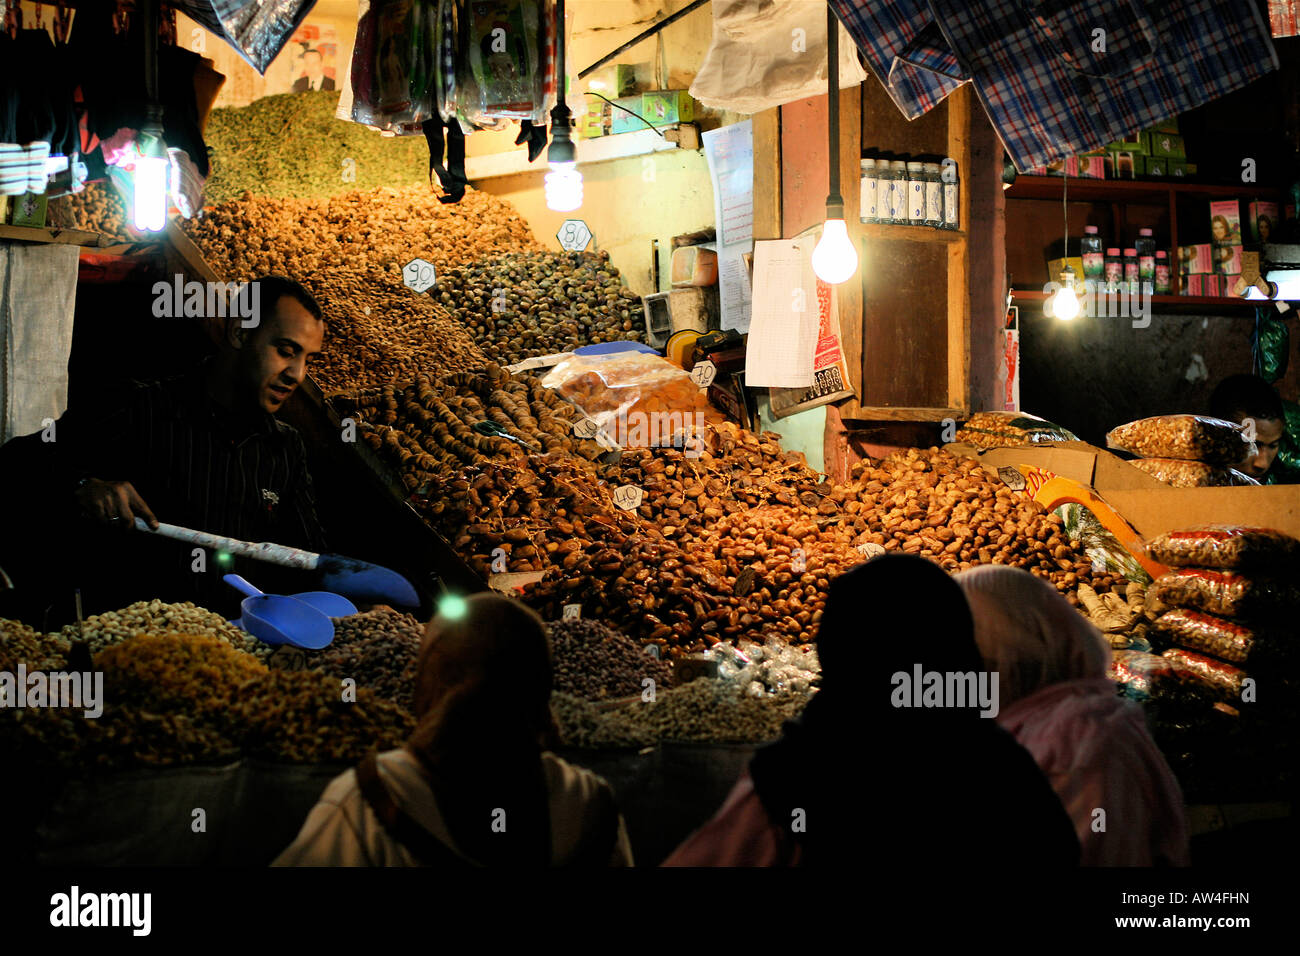 Market stall lit by lamps in the souk Marrakech, Morocco Stock Photo